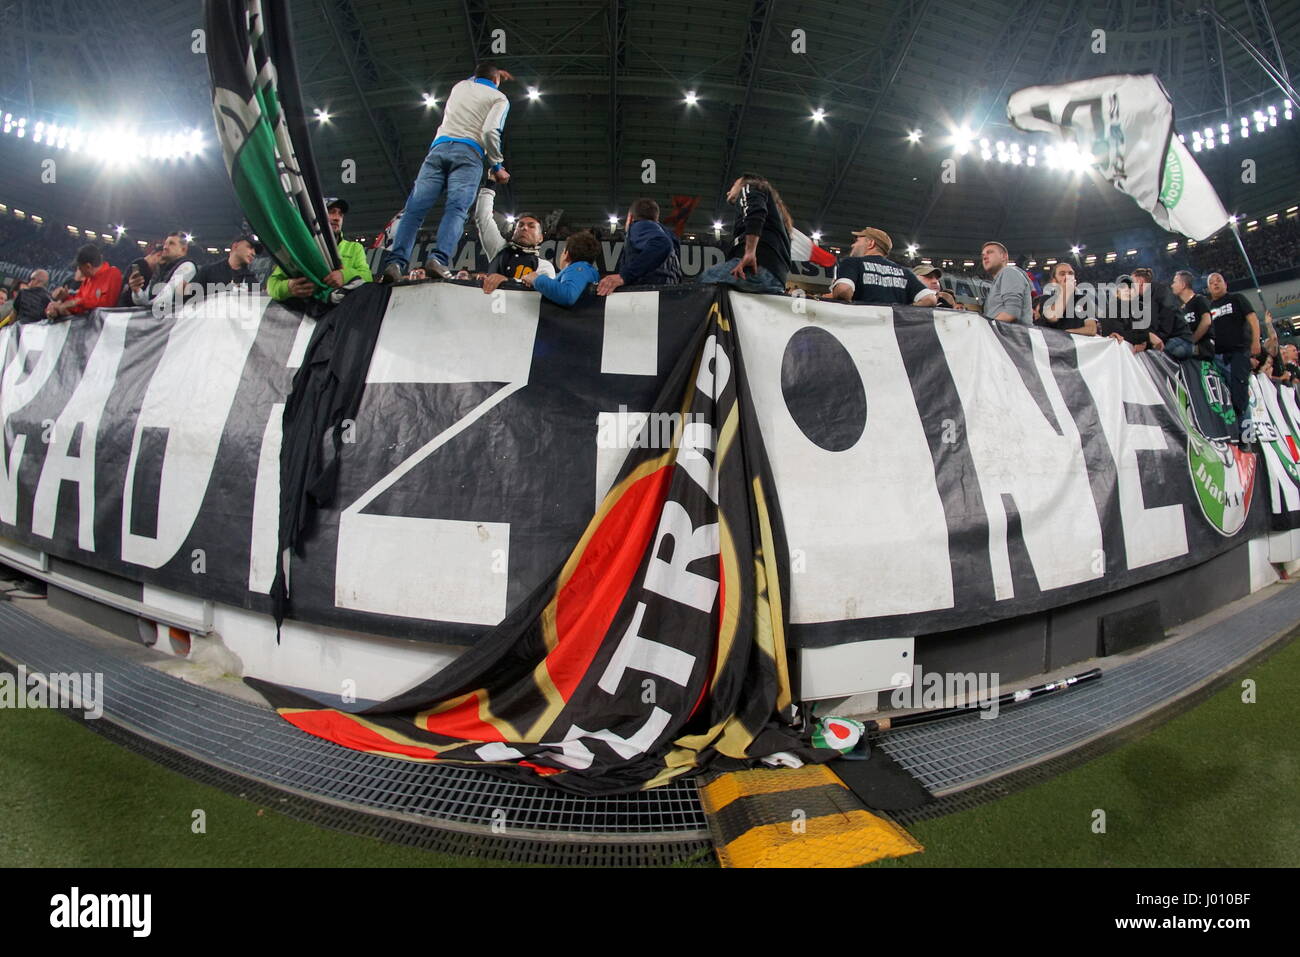 Turin, Italy. 08th Apr, 2017. Fans of Juventus during the Serie A football match between Juventus FC and AC Chievo Verona at Juventus Stadium on April 08, 2017 in Turin, Italy. The final result of the match is 2-0. Credit: Massimiliano Ferraro/Alamy Live News Stock Photo